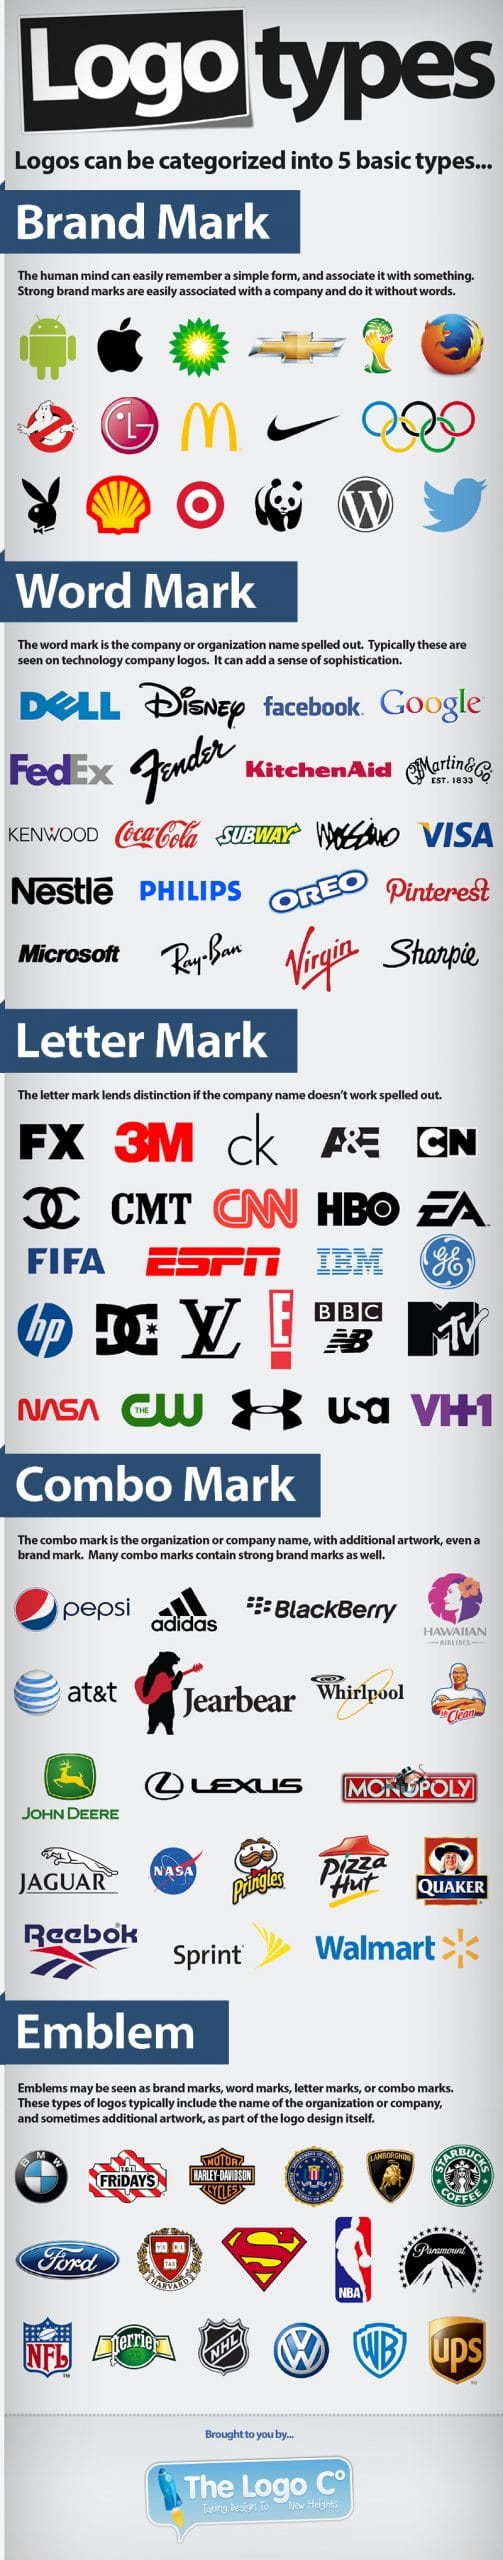 The 5 Logo Styles - What's Yours? - The Logo Company